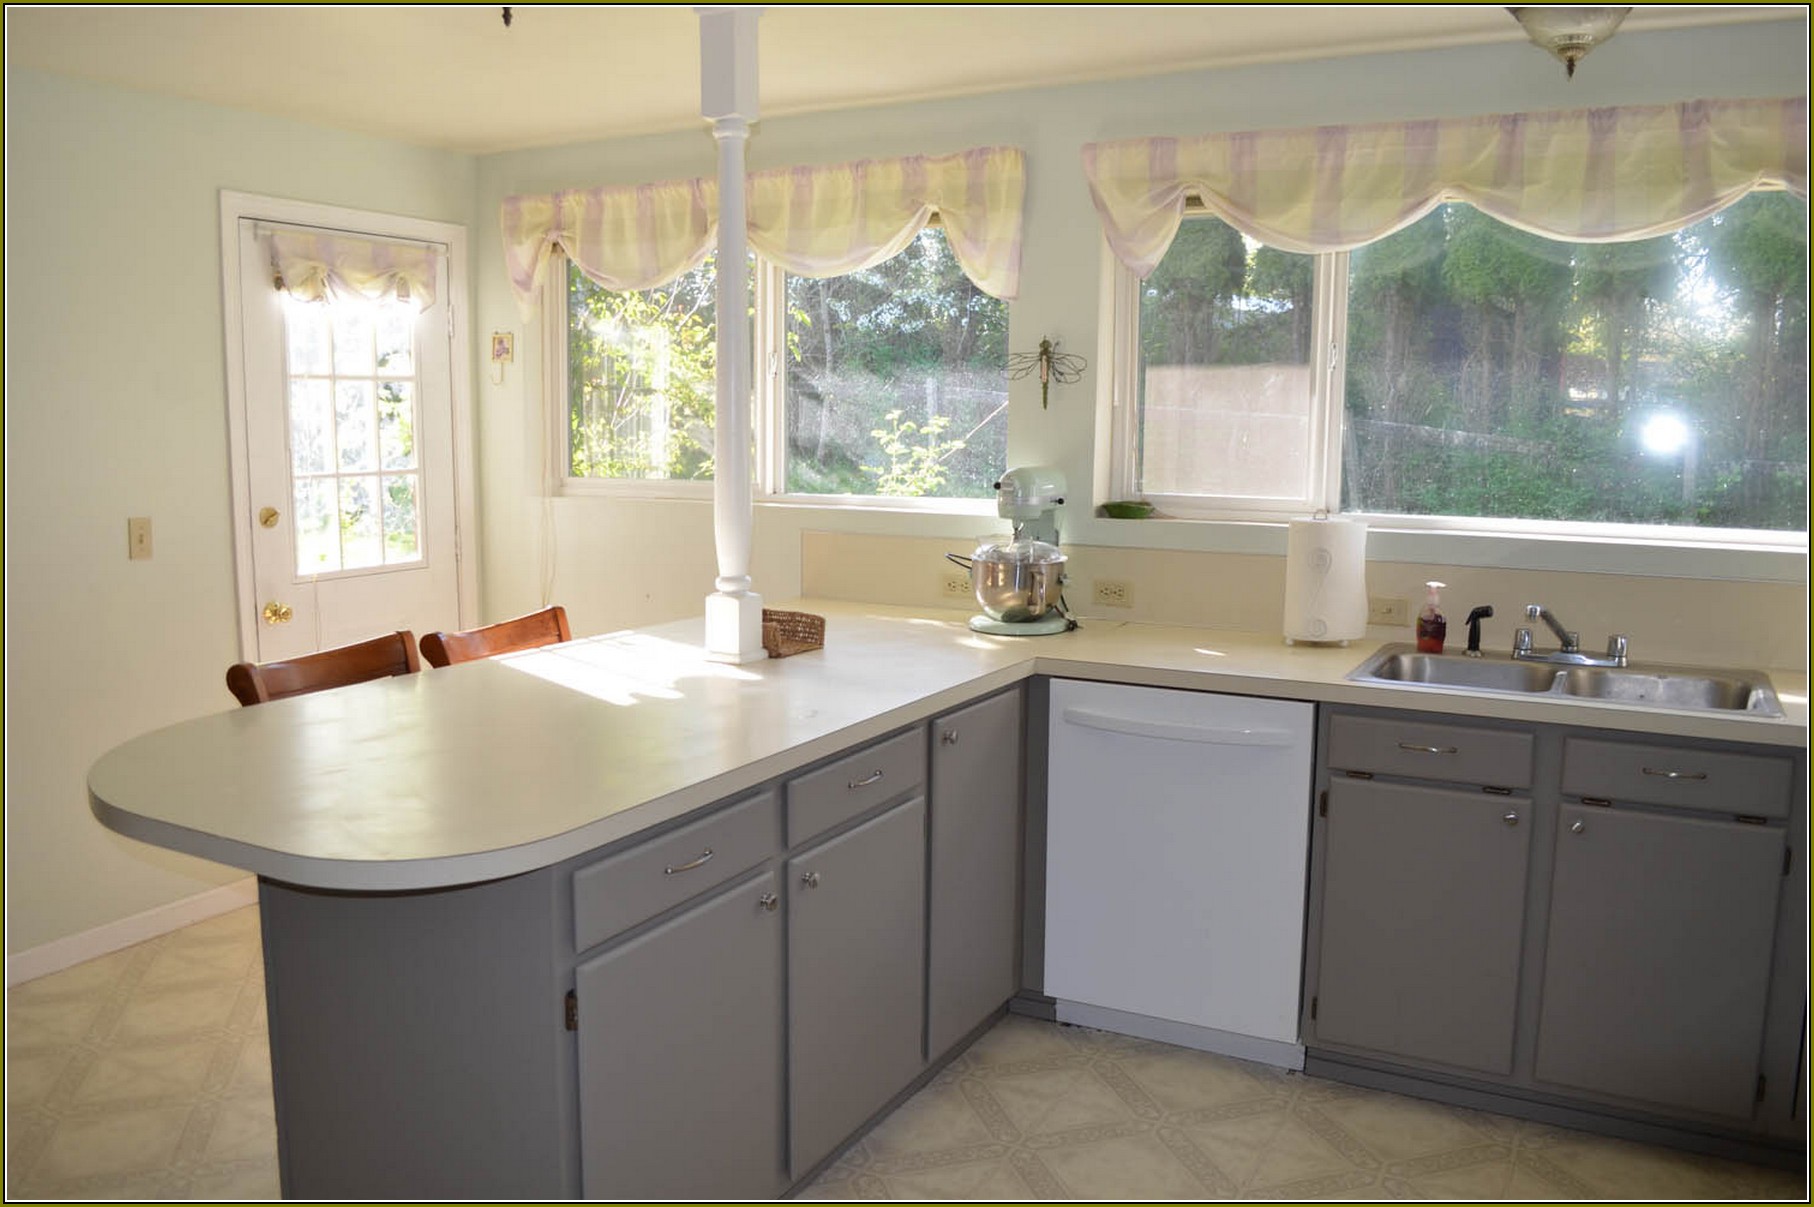 Whitewash Kitchen Cabinets Before After